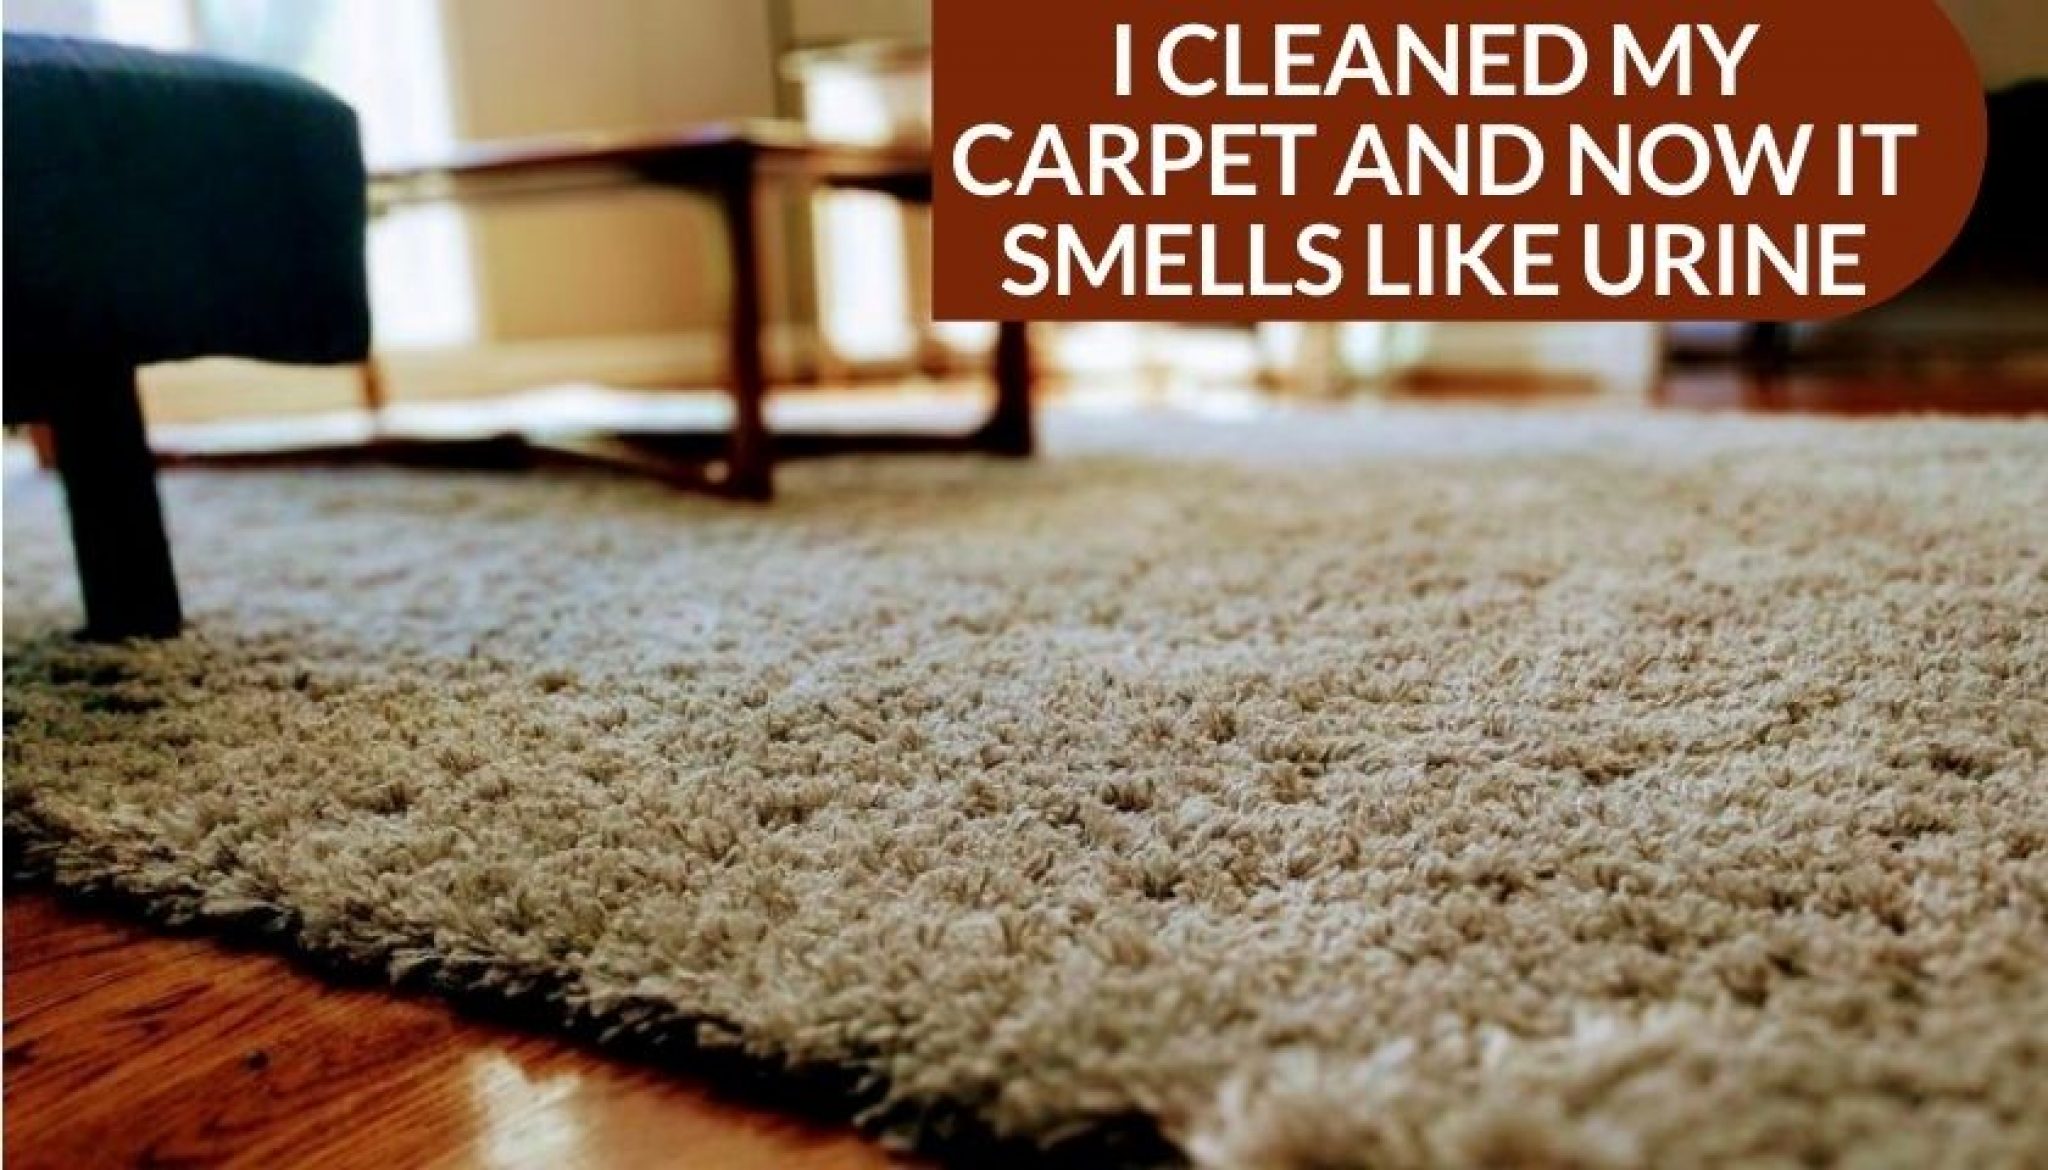 I Cleaned My Carpet and Now It Smells Like Urine | Why & How My Toilet Overflowed And Now My Carpet Smells